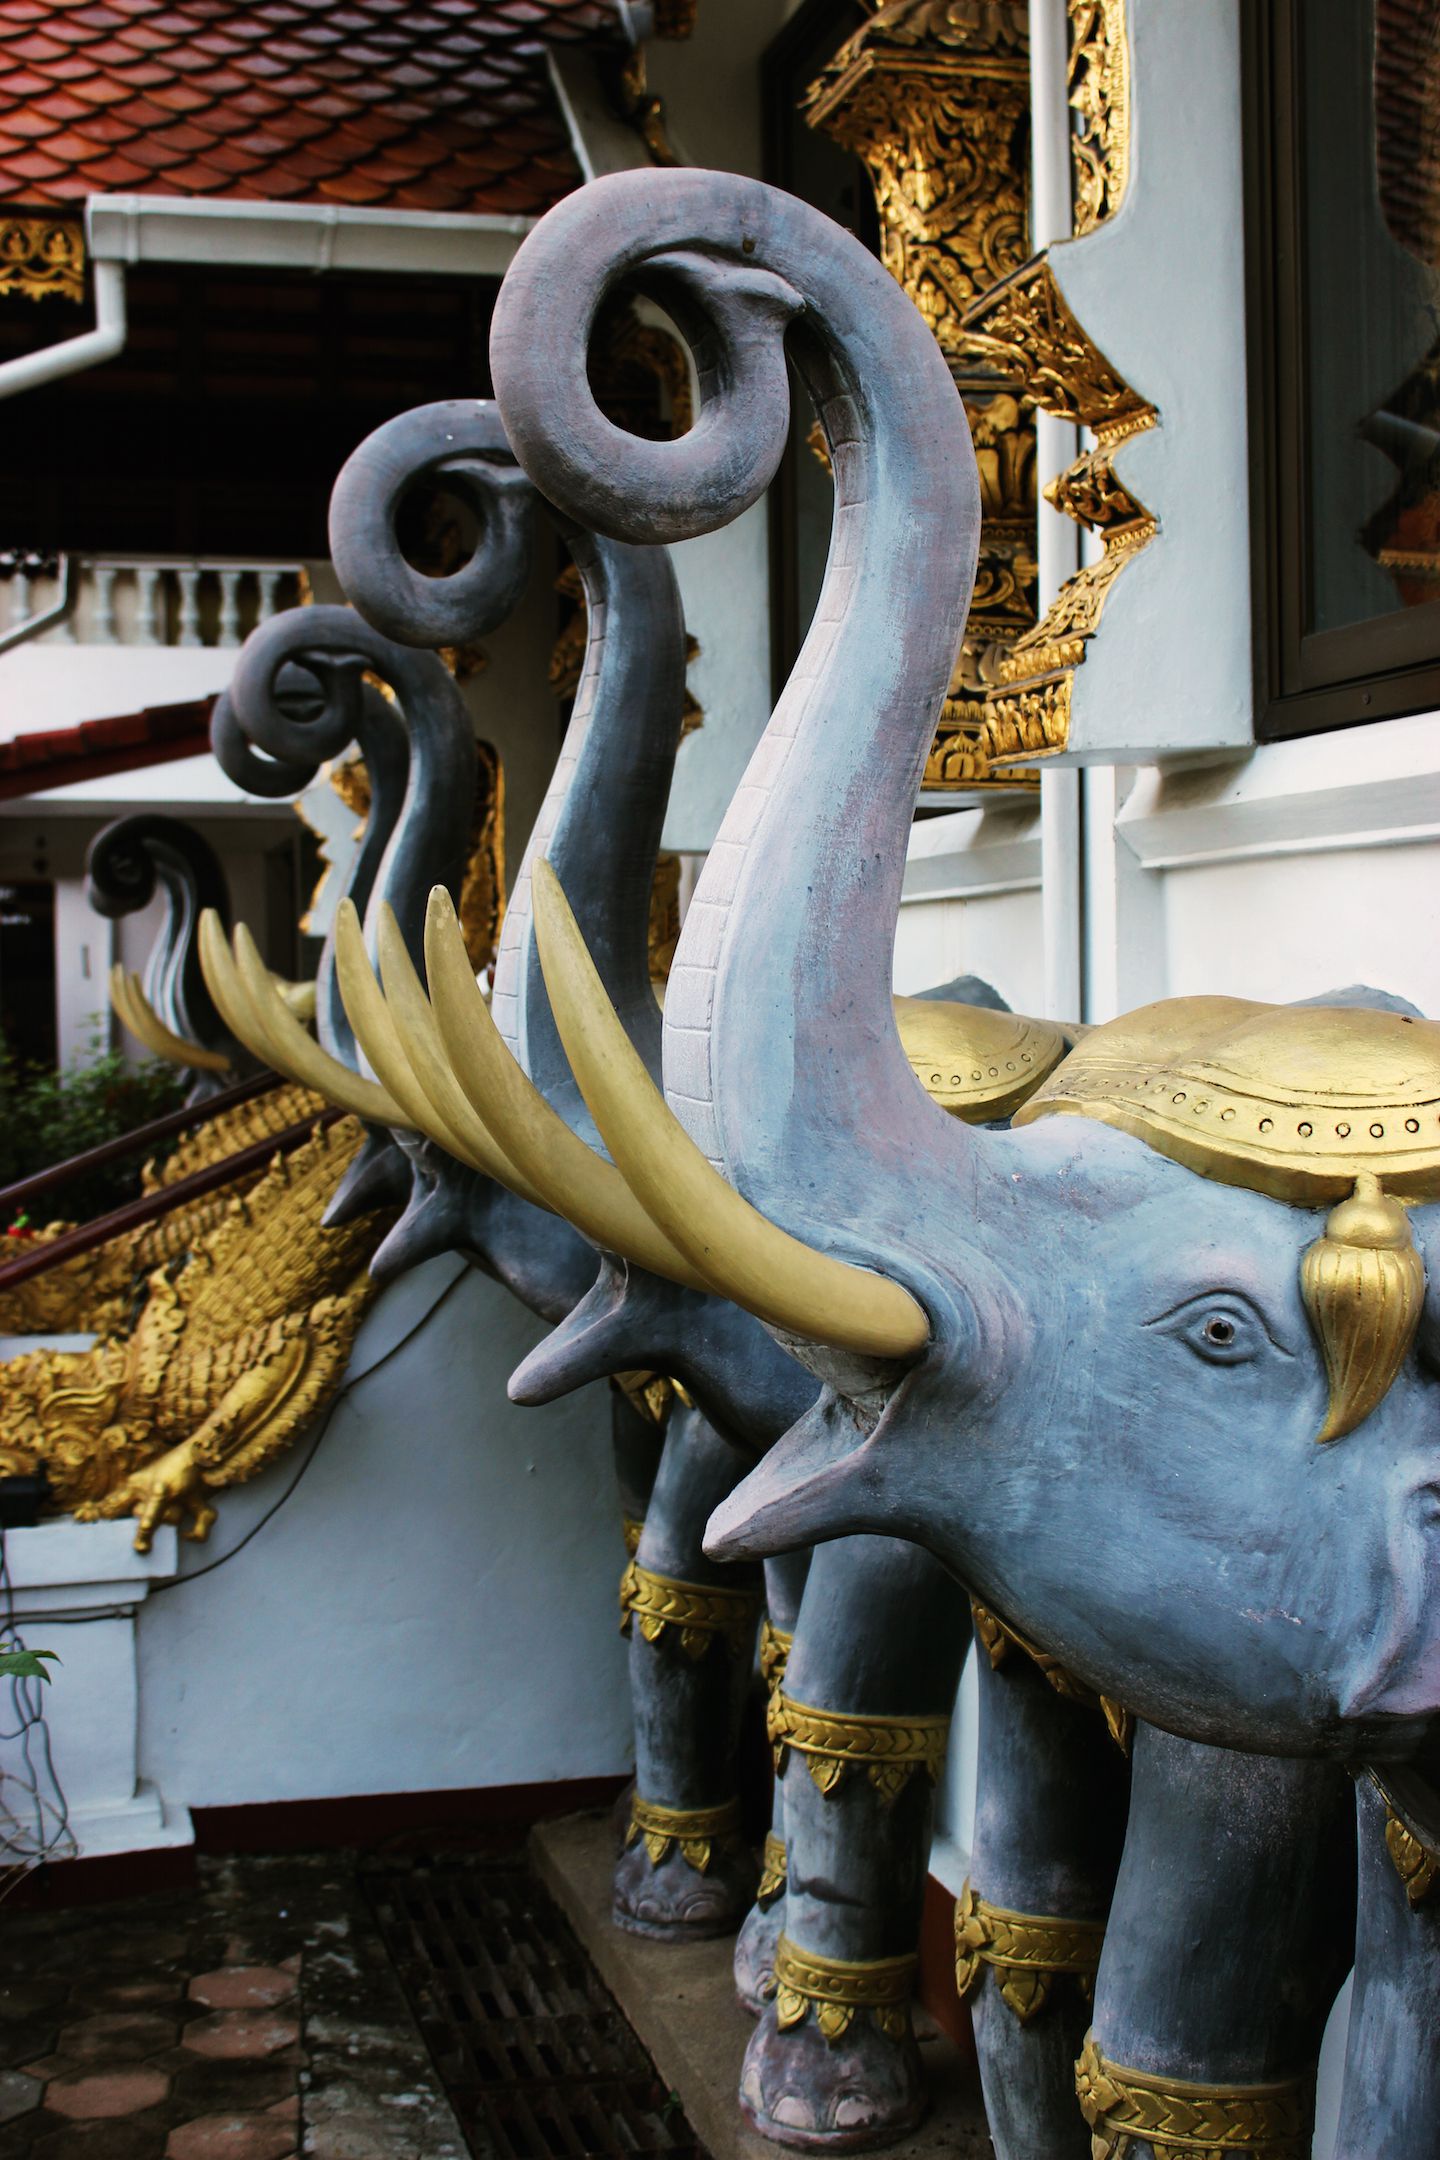 Elephant statues at the temples in Chiang Rai